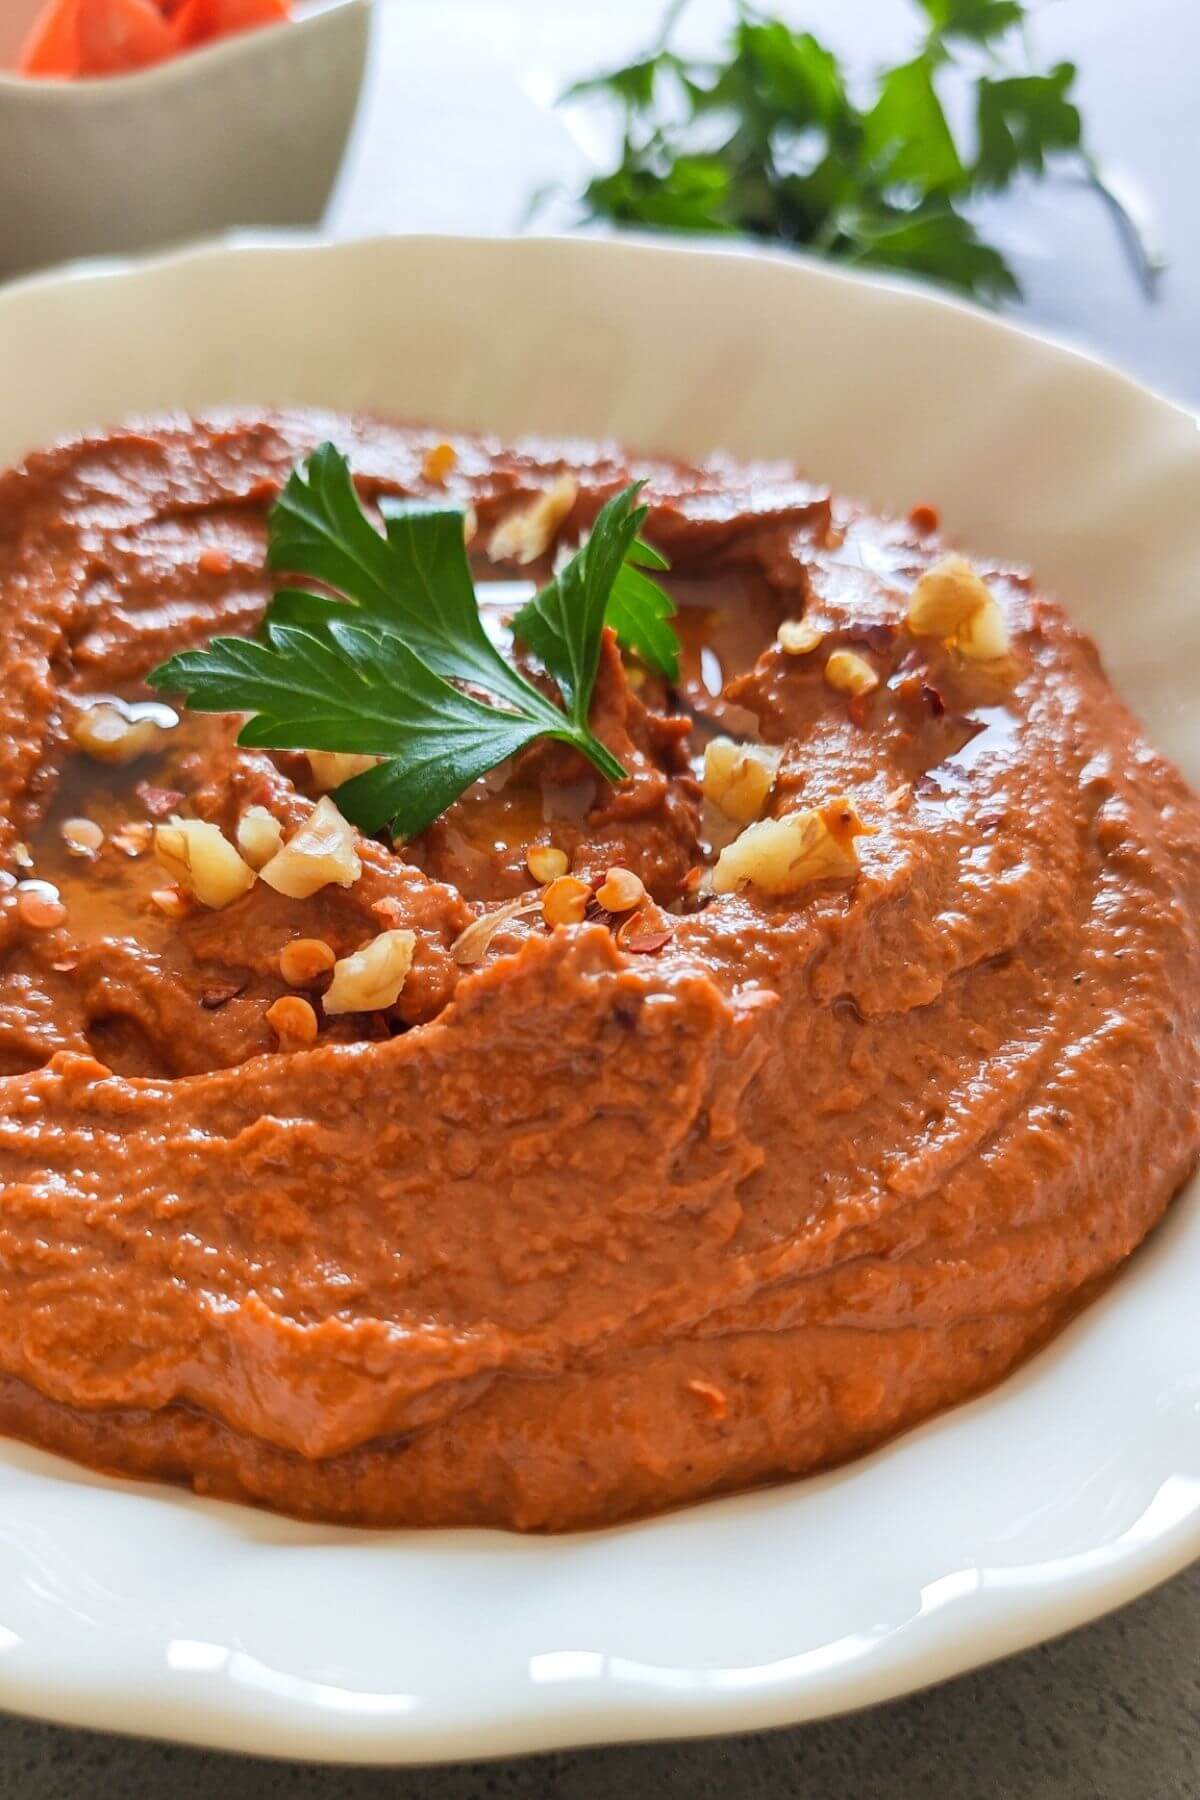 Lebanese muhammara garnished with chopped walnuts and parsley in a white bowl